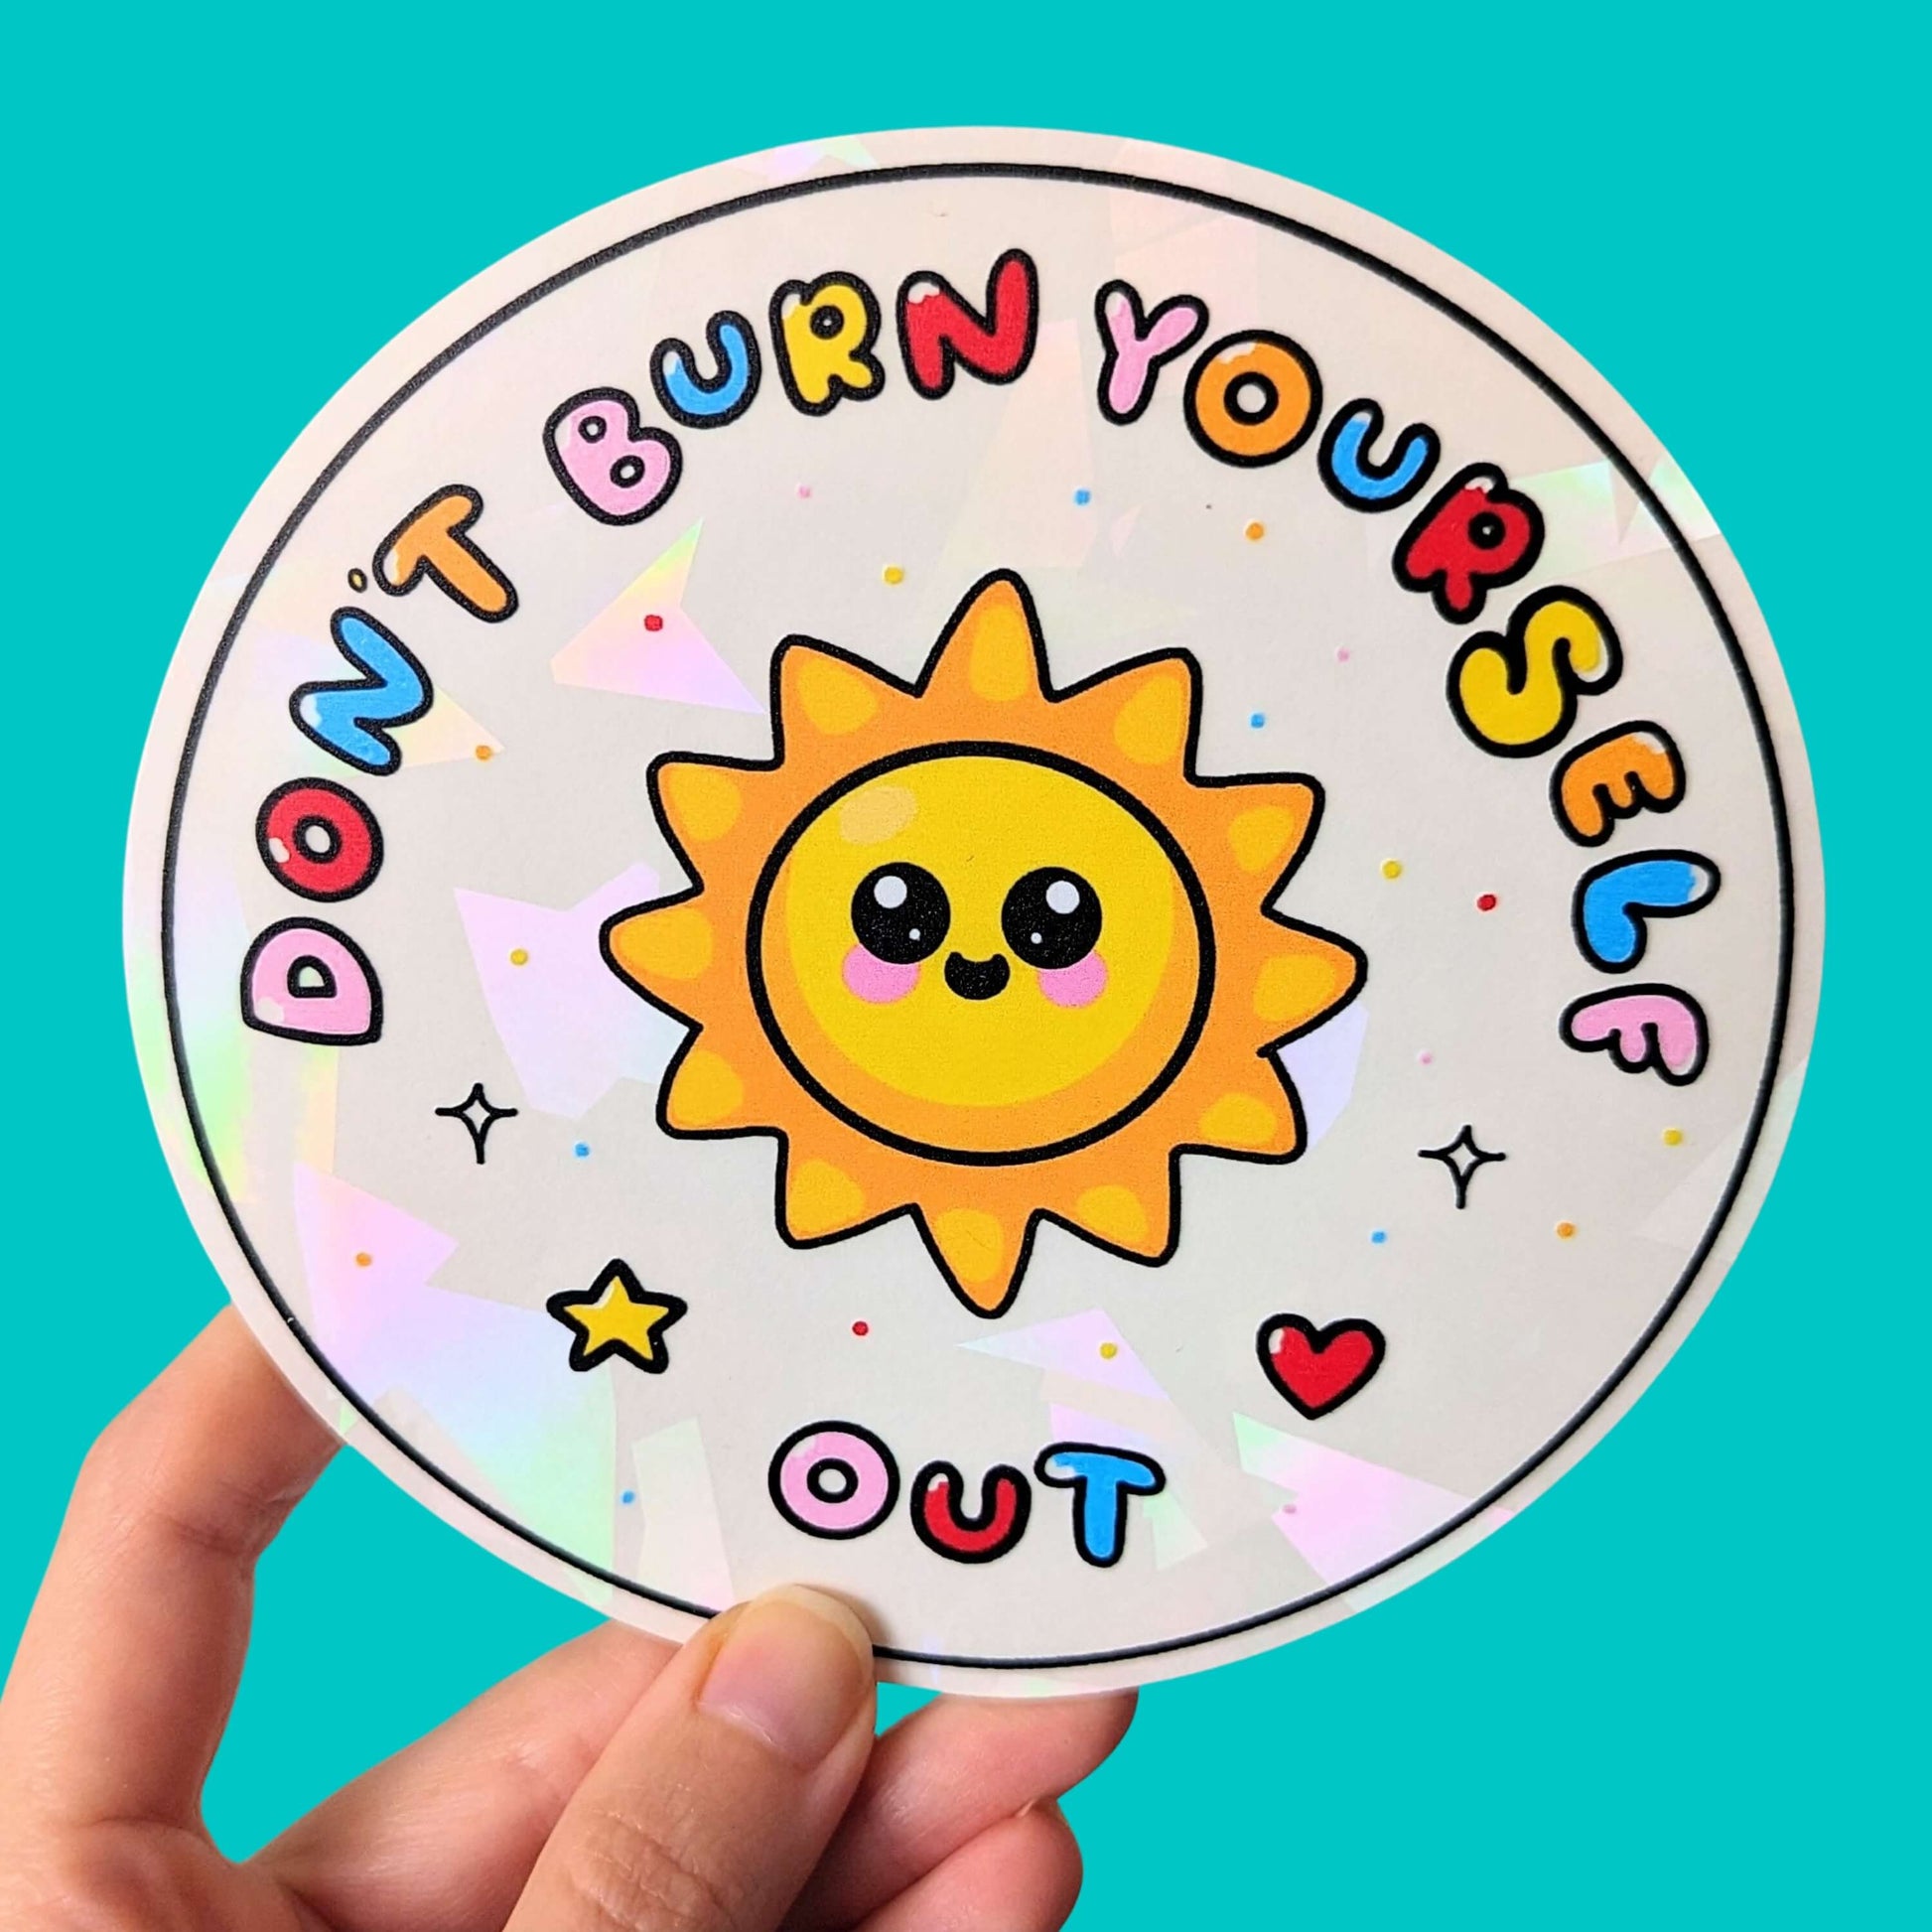 The Don't Burn Yourself Out Sun Catcher Rainbow Window Sticker being held up in front of a blue background. The circle holographic sticker features a smiling sunshine with pink blush in the middle with rainbow bubble writing reading 'don't burn yourself out' with a yellow star, red heart, black sparkle outlines and rainbow dots all over. The design is inspired by self care.